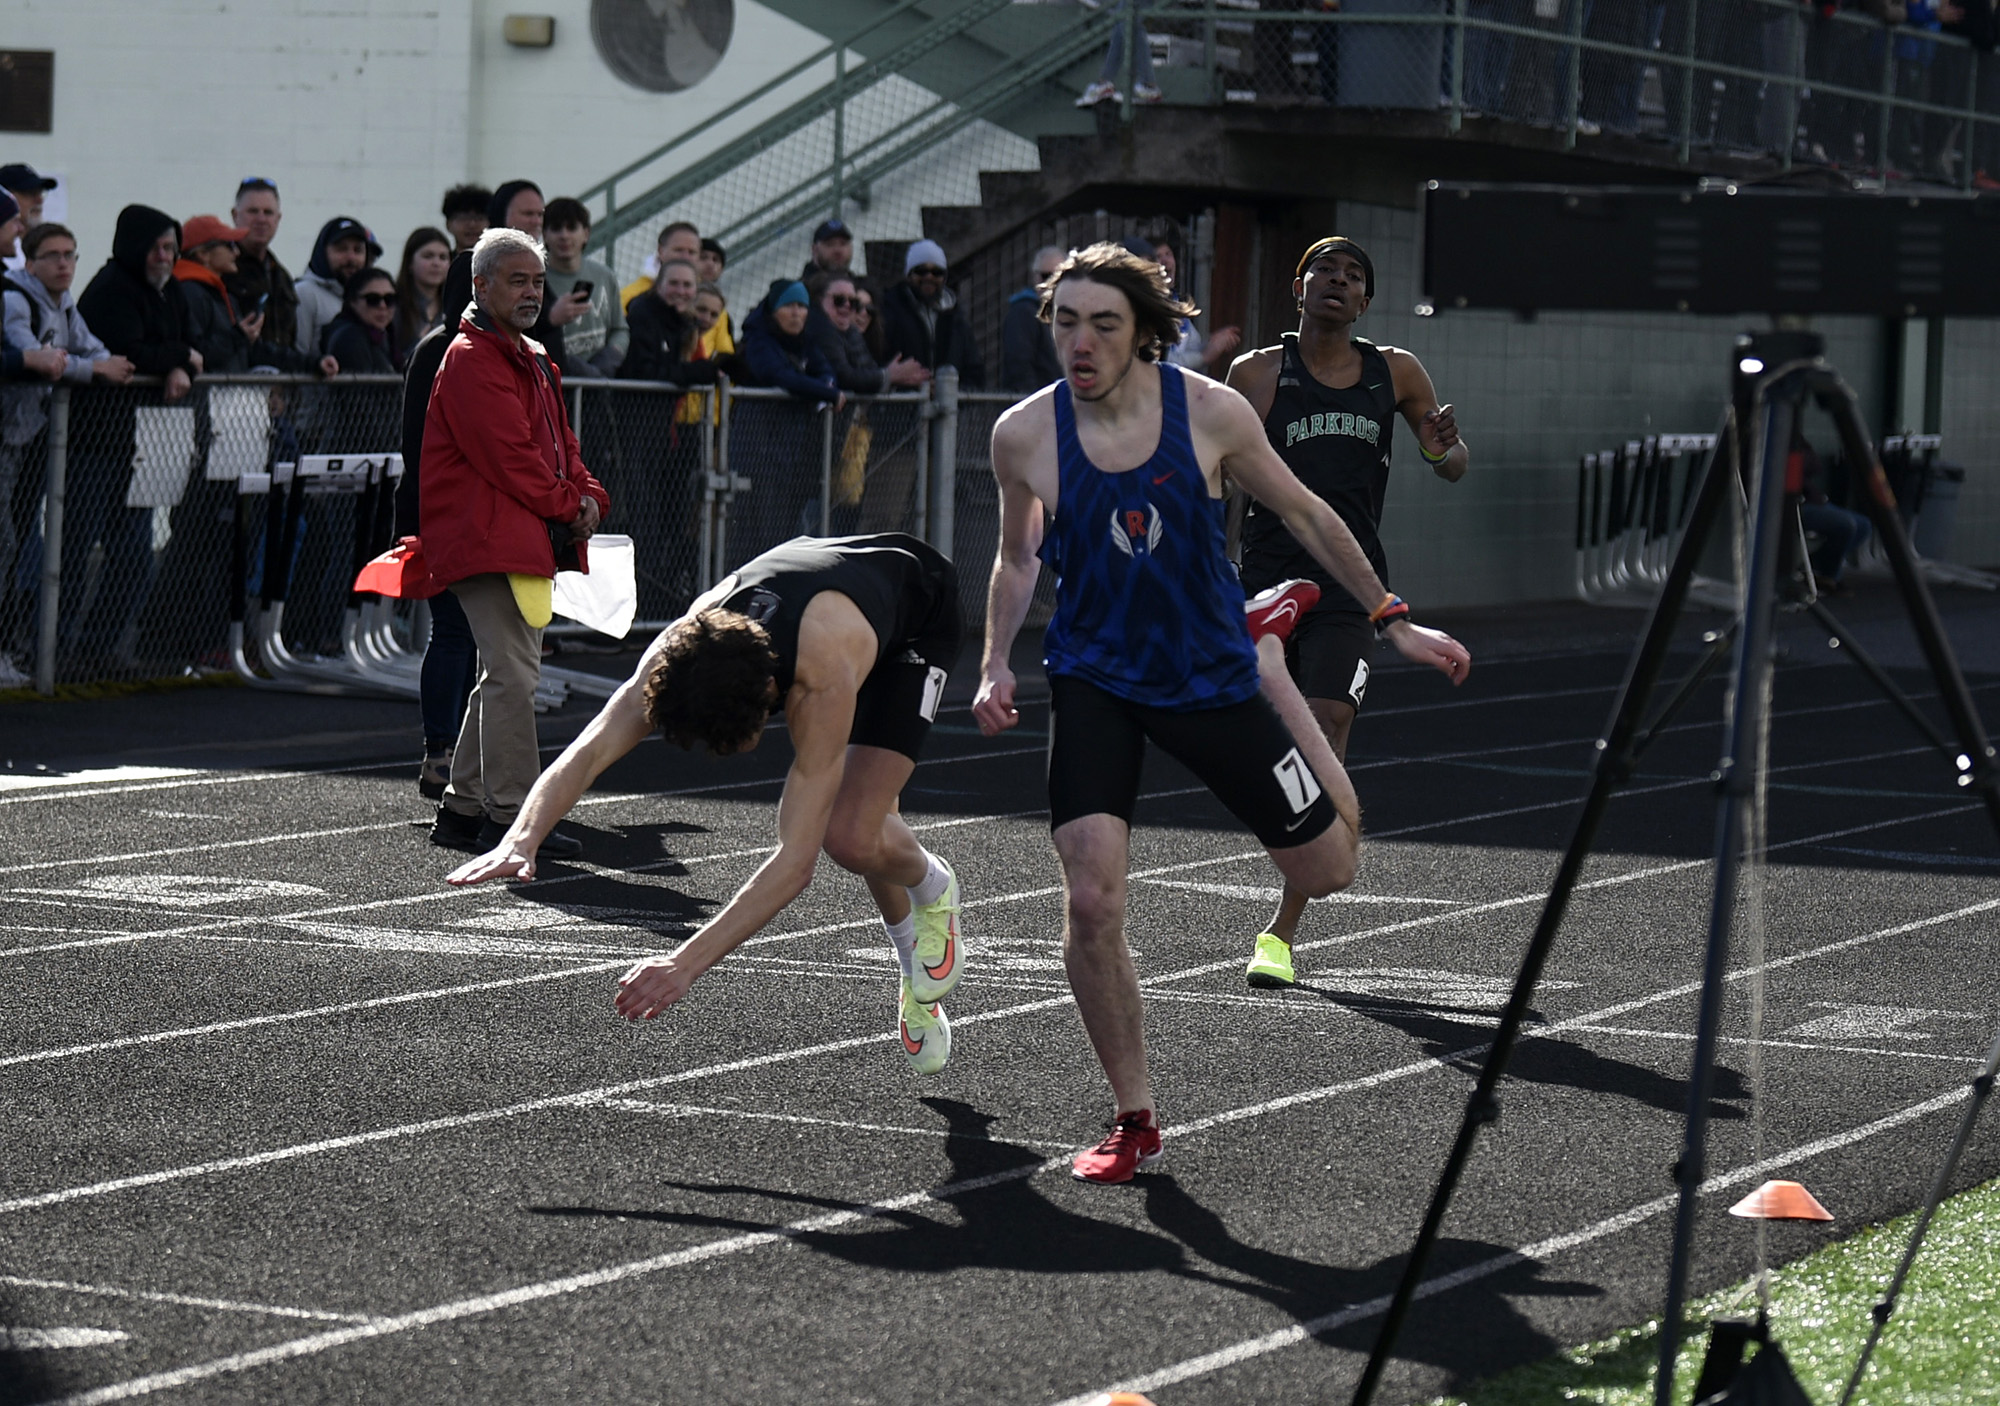 Union's Grayson Caldwell falls to the track after being edged out at the finish line by Liam Rapp of Ridgefield in the boys 800 meters at the Tiger Relays at Battle Ground High School on Saturday, March 25, 2023.